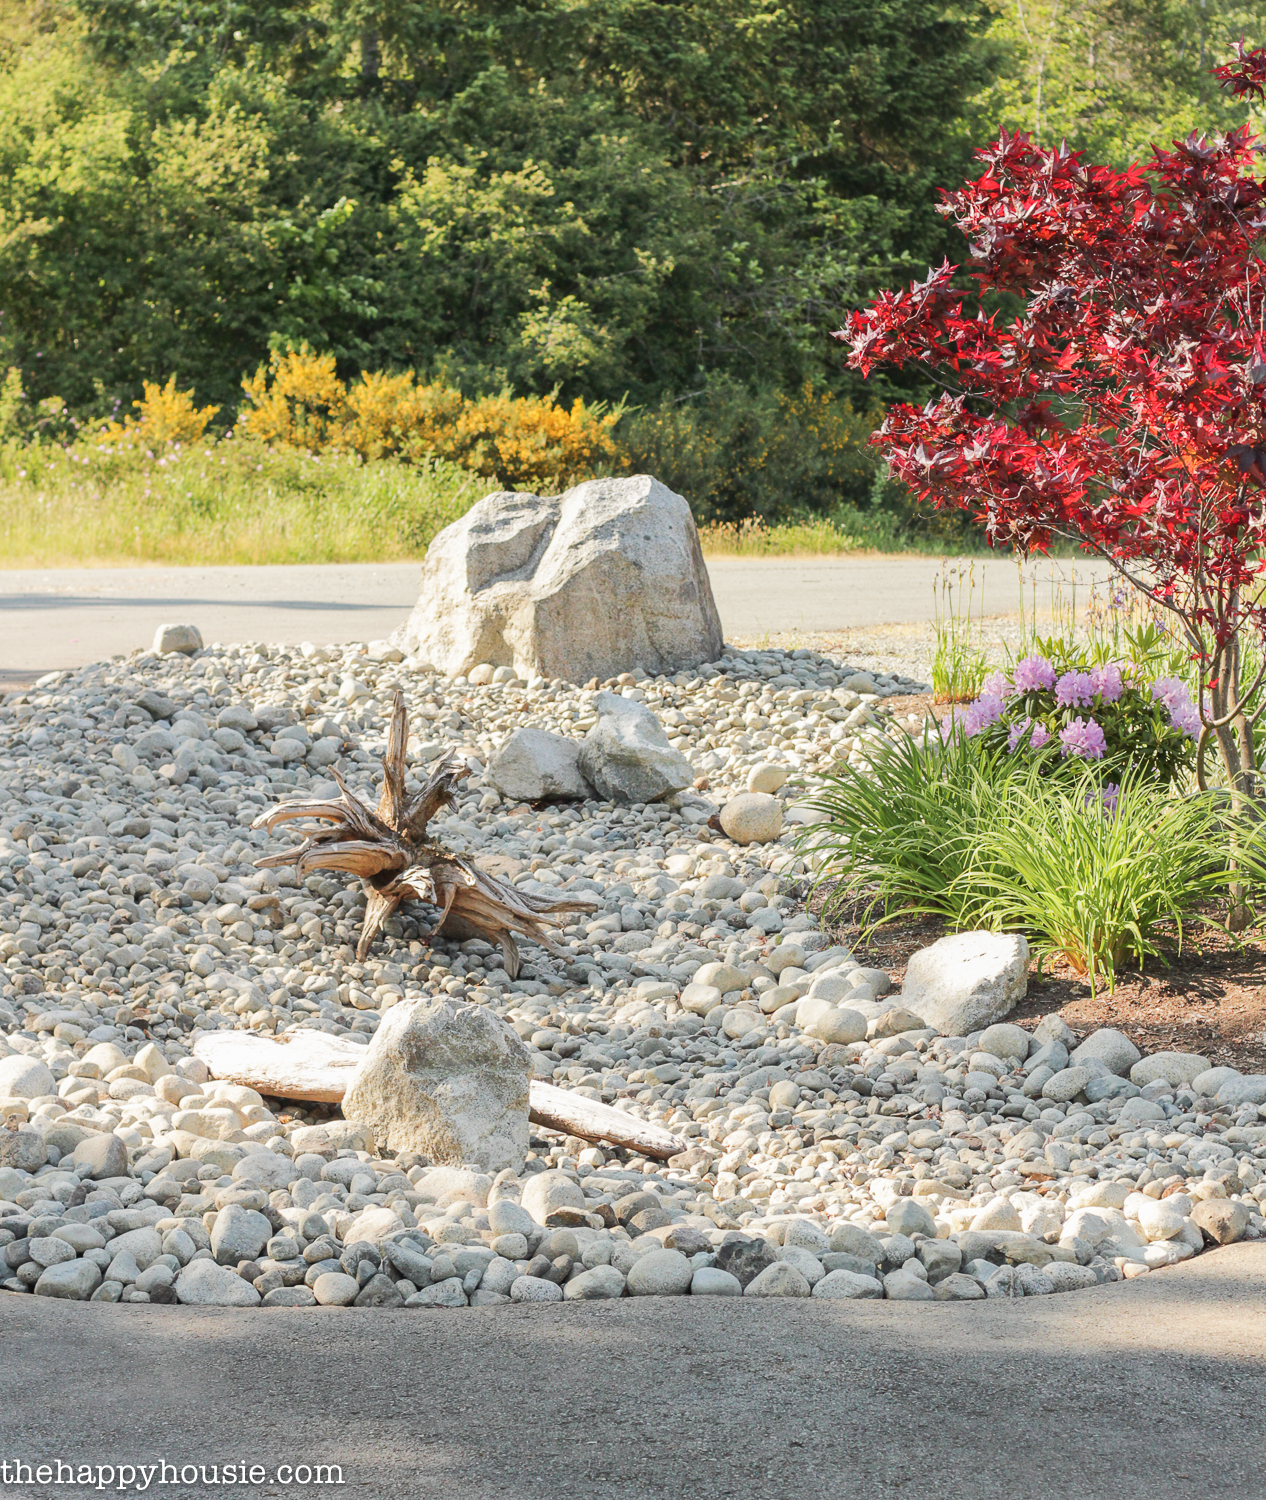 landscaping with river rock & dry river rock garden ideas | the